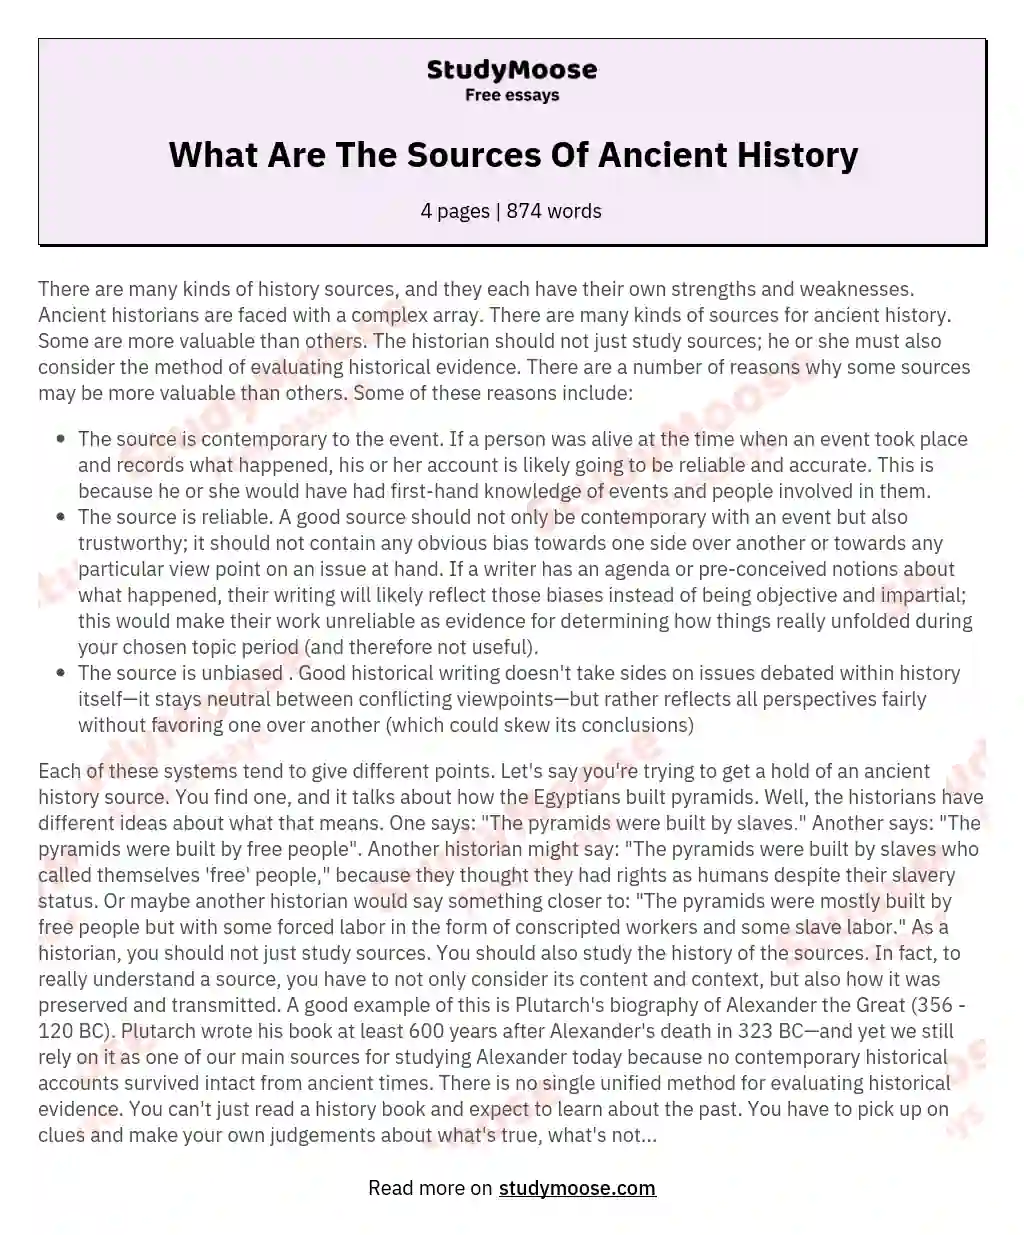 What Are The Sources Of Ancient History essay